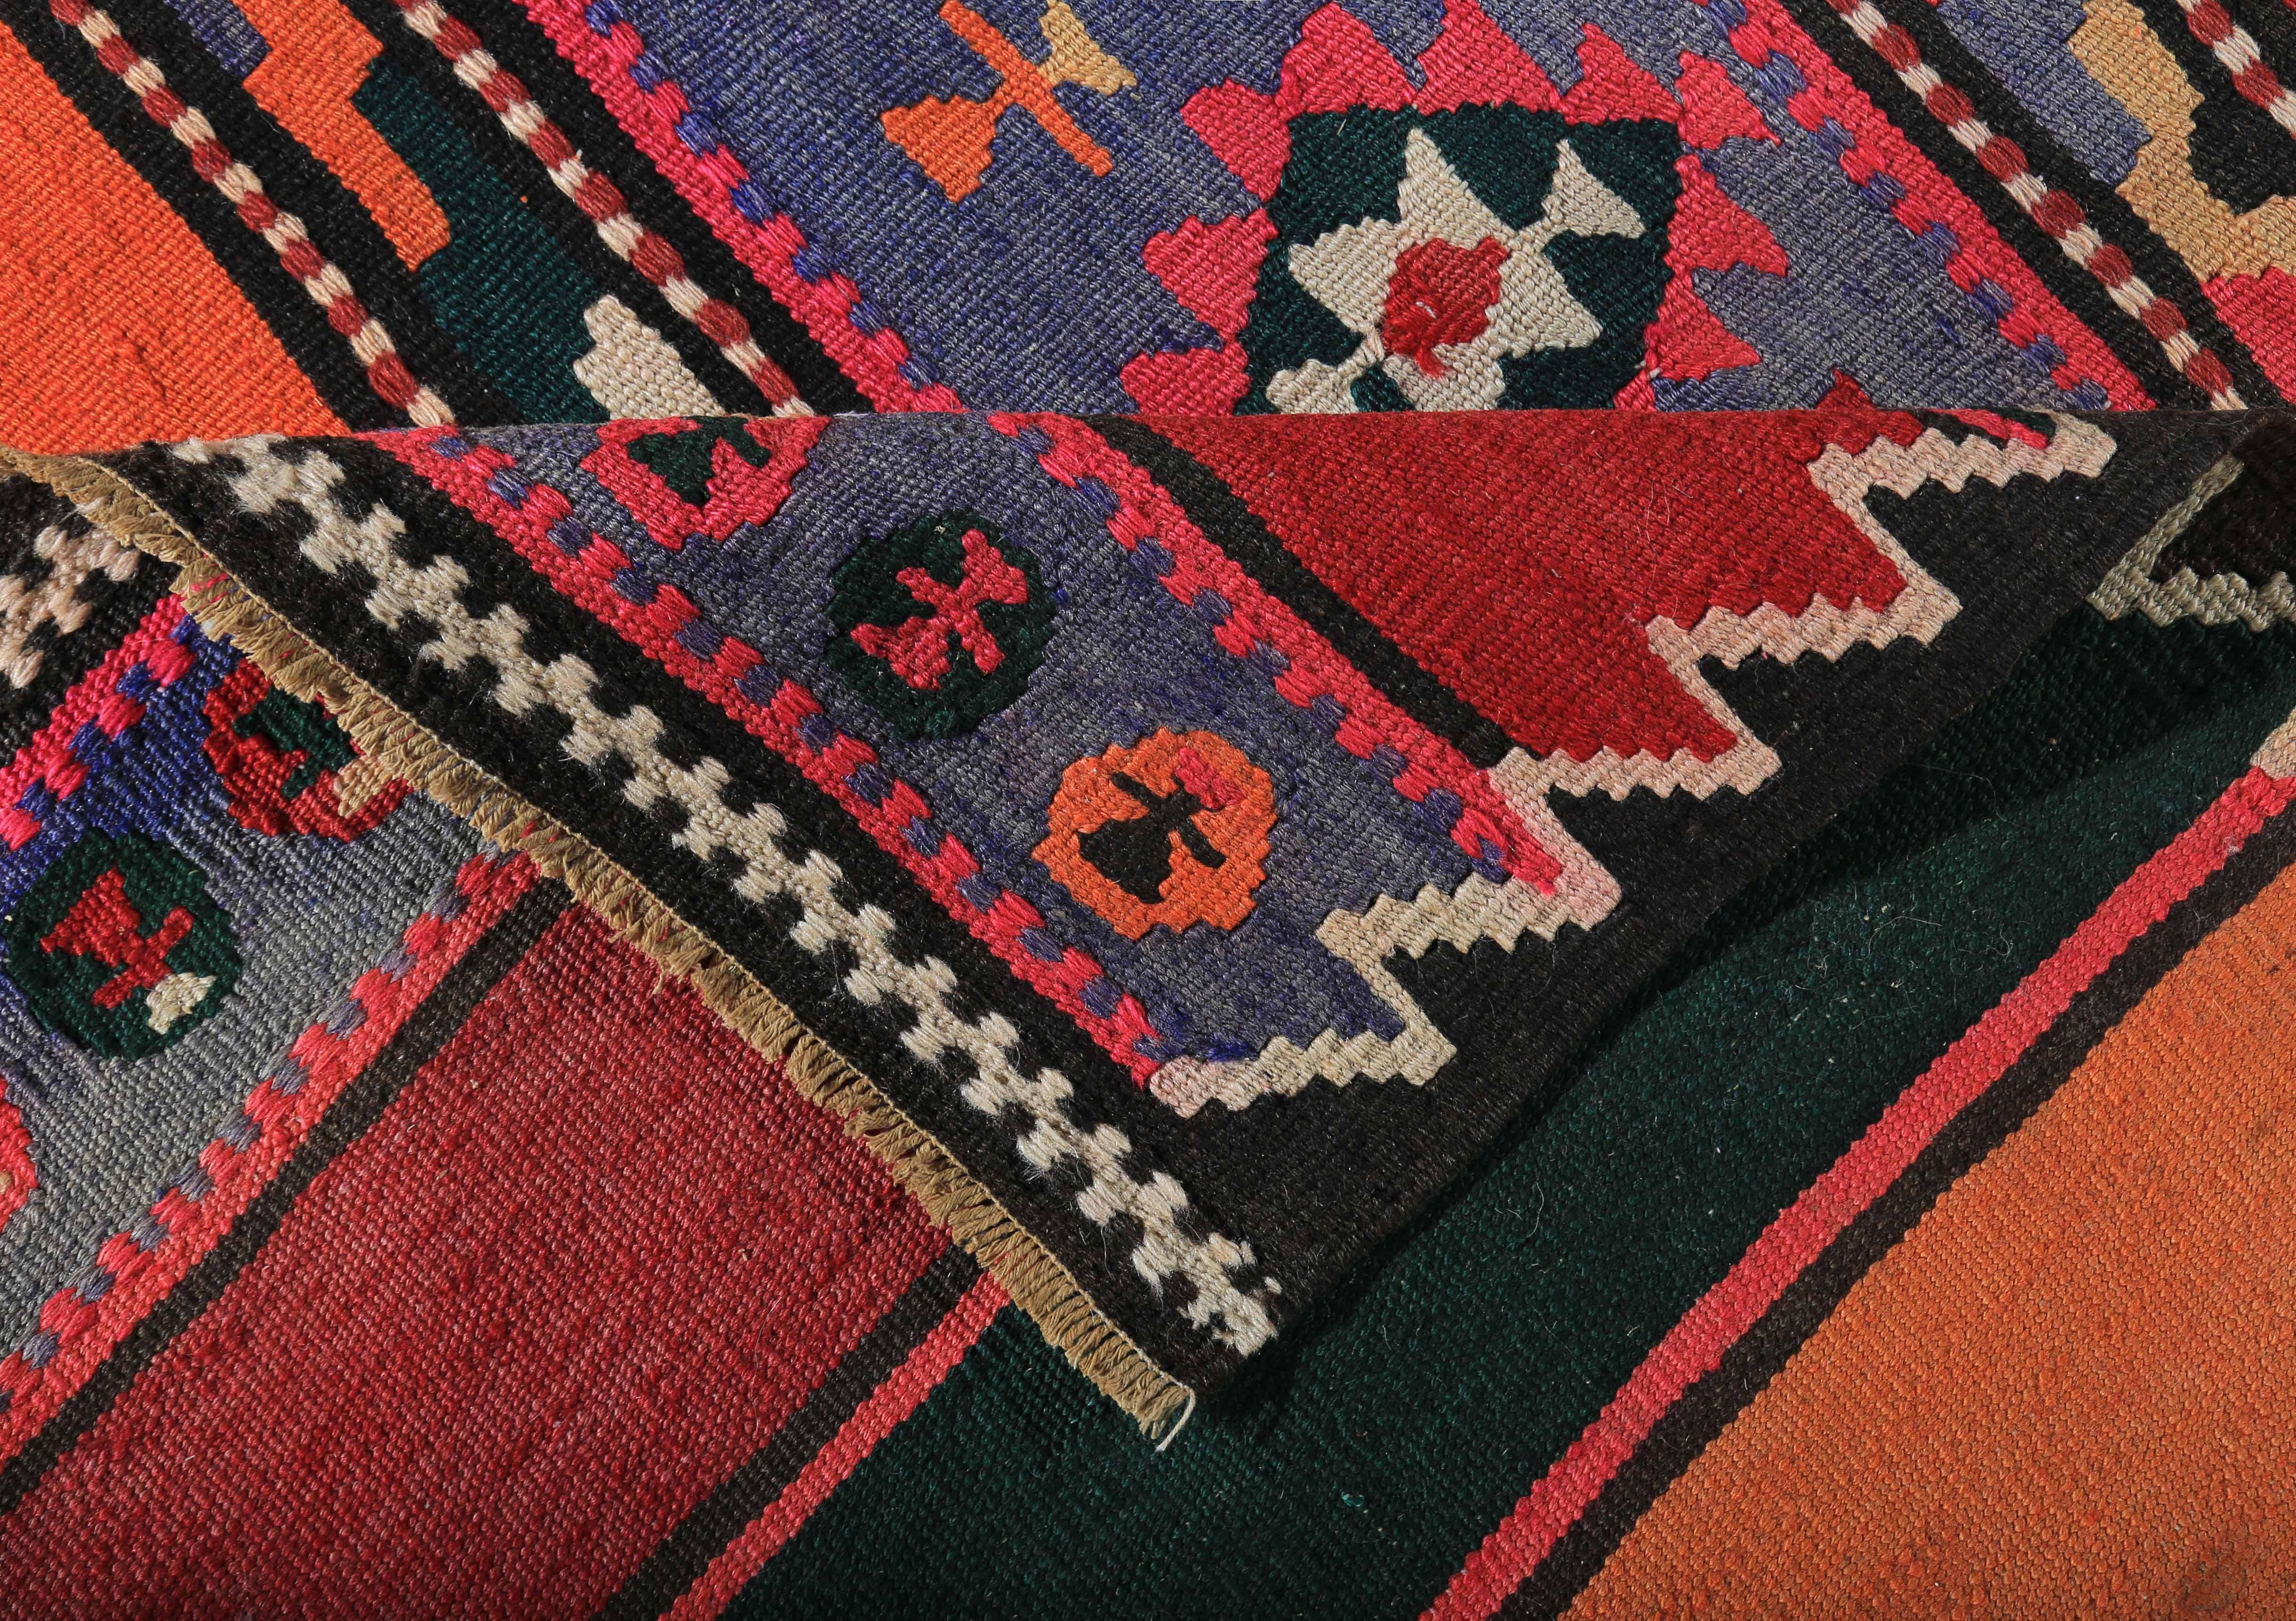 Hand-Woven Turkish Kilim Rug with Green and Red Stripes Decorated with Tribal Medallions